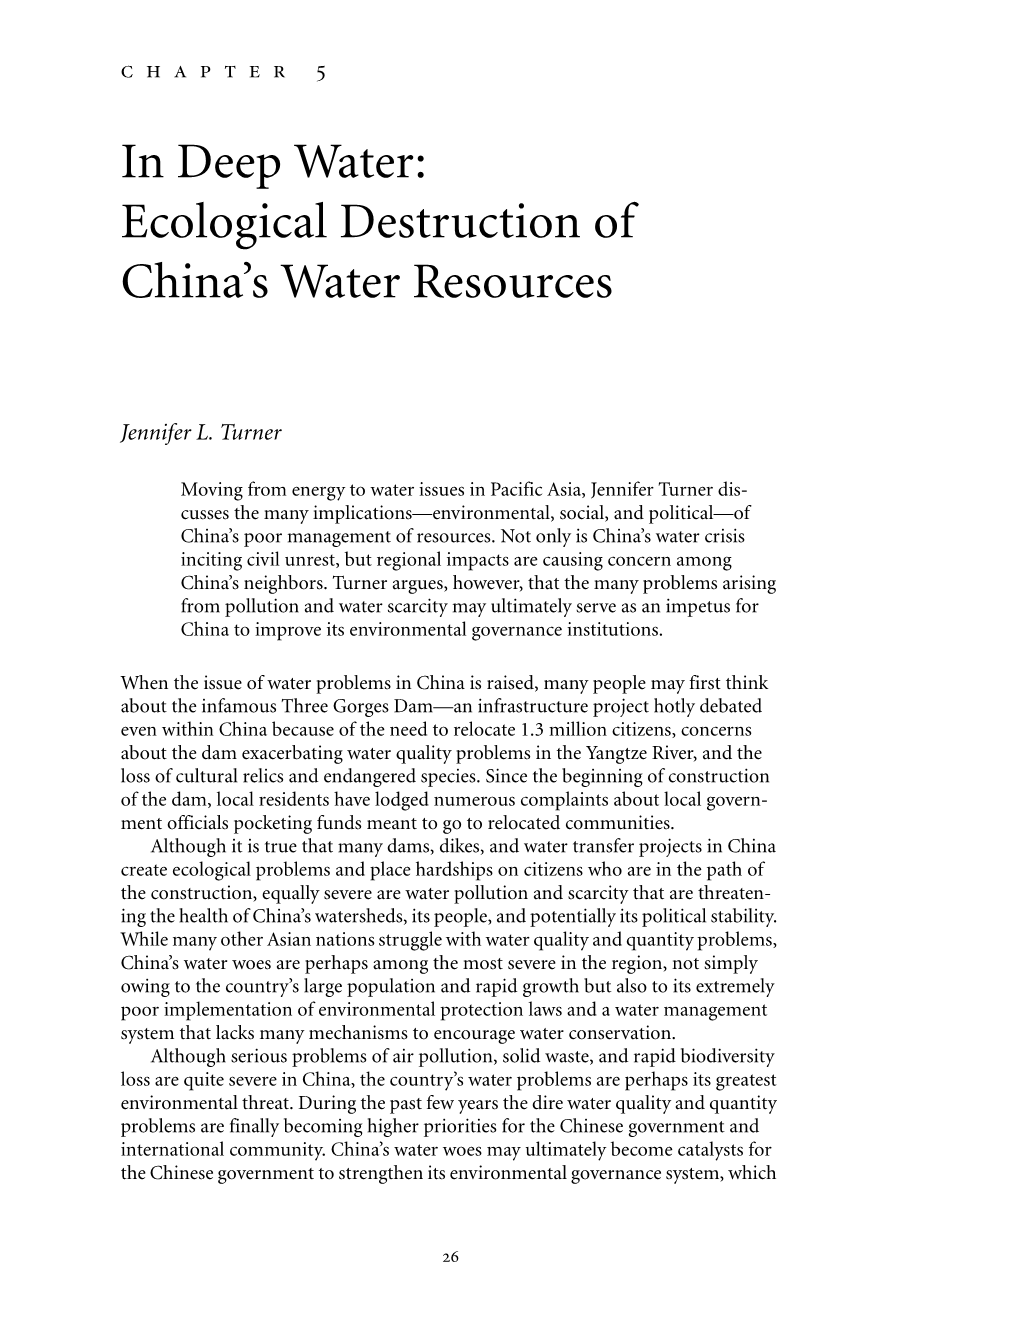 In Deep Water: Ecological Destruction of China's Water Resources